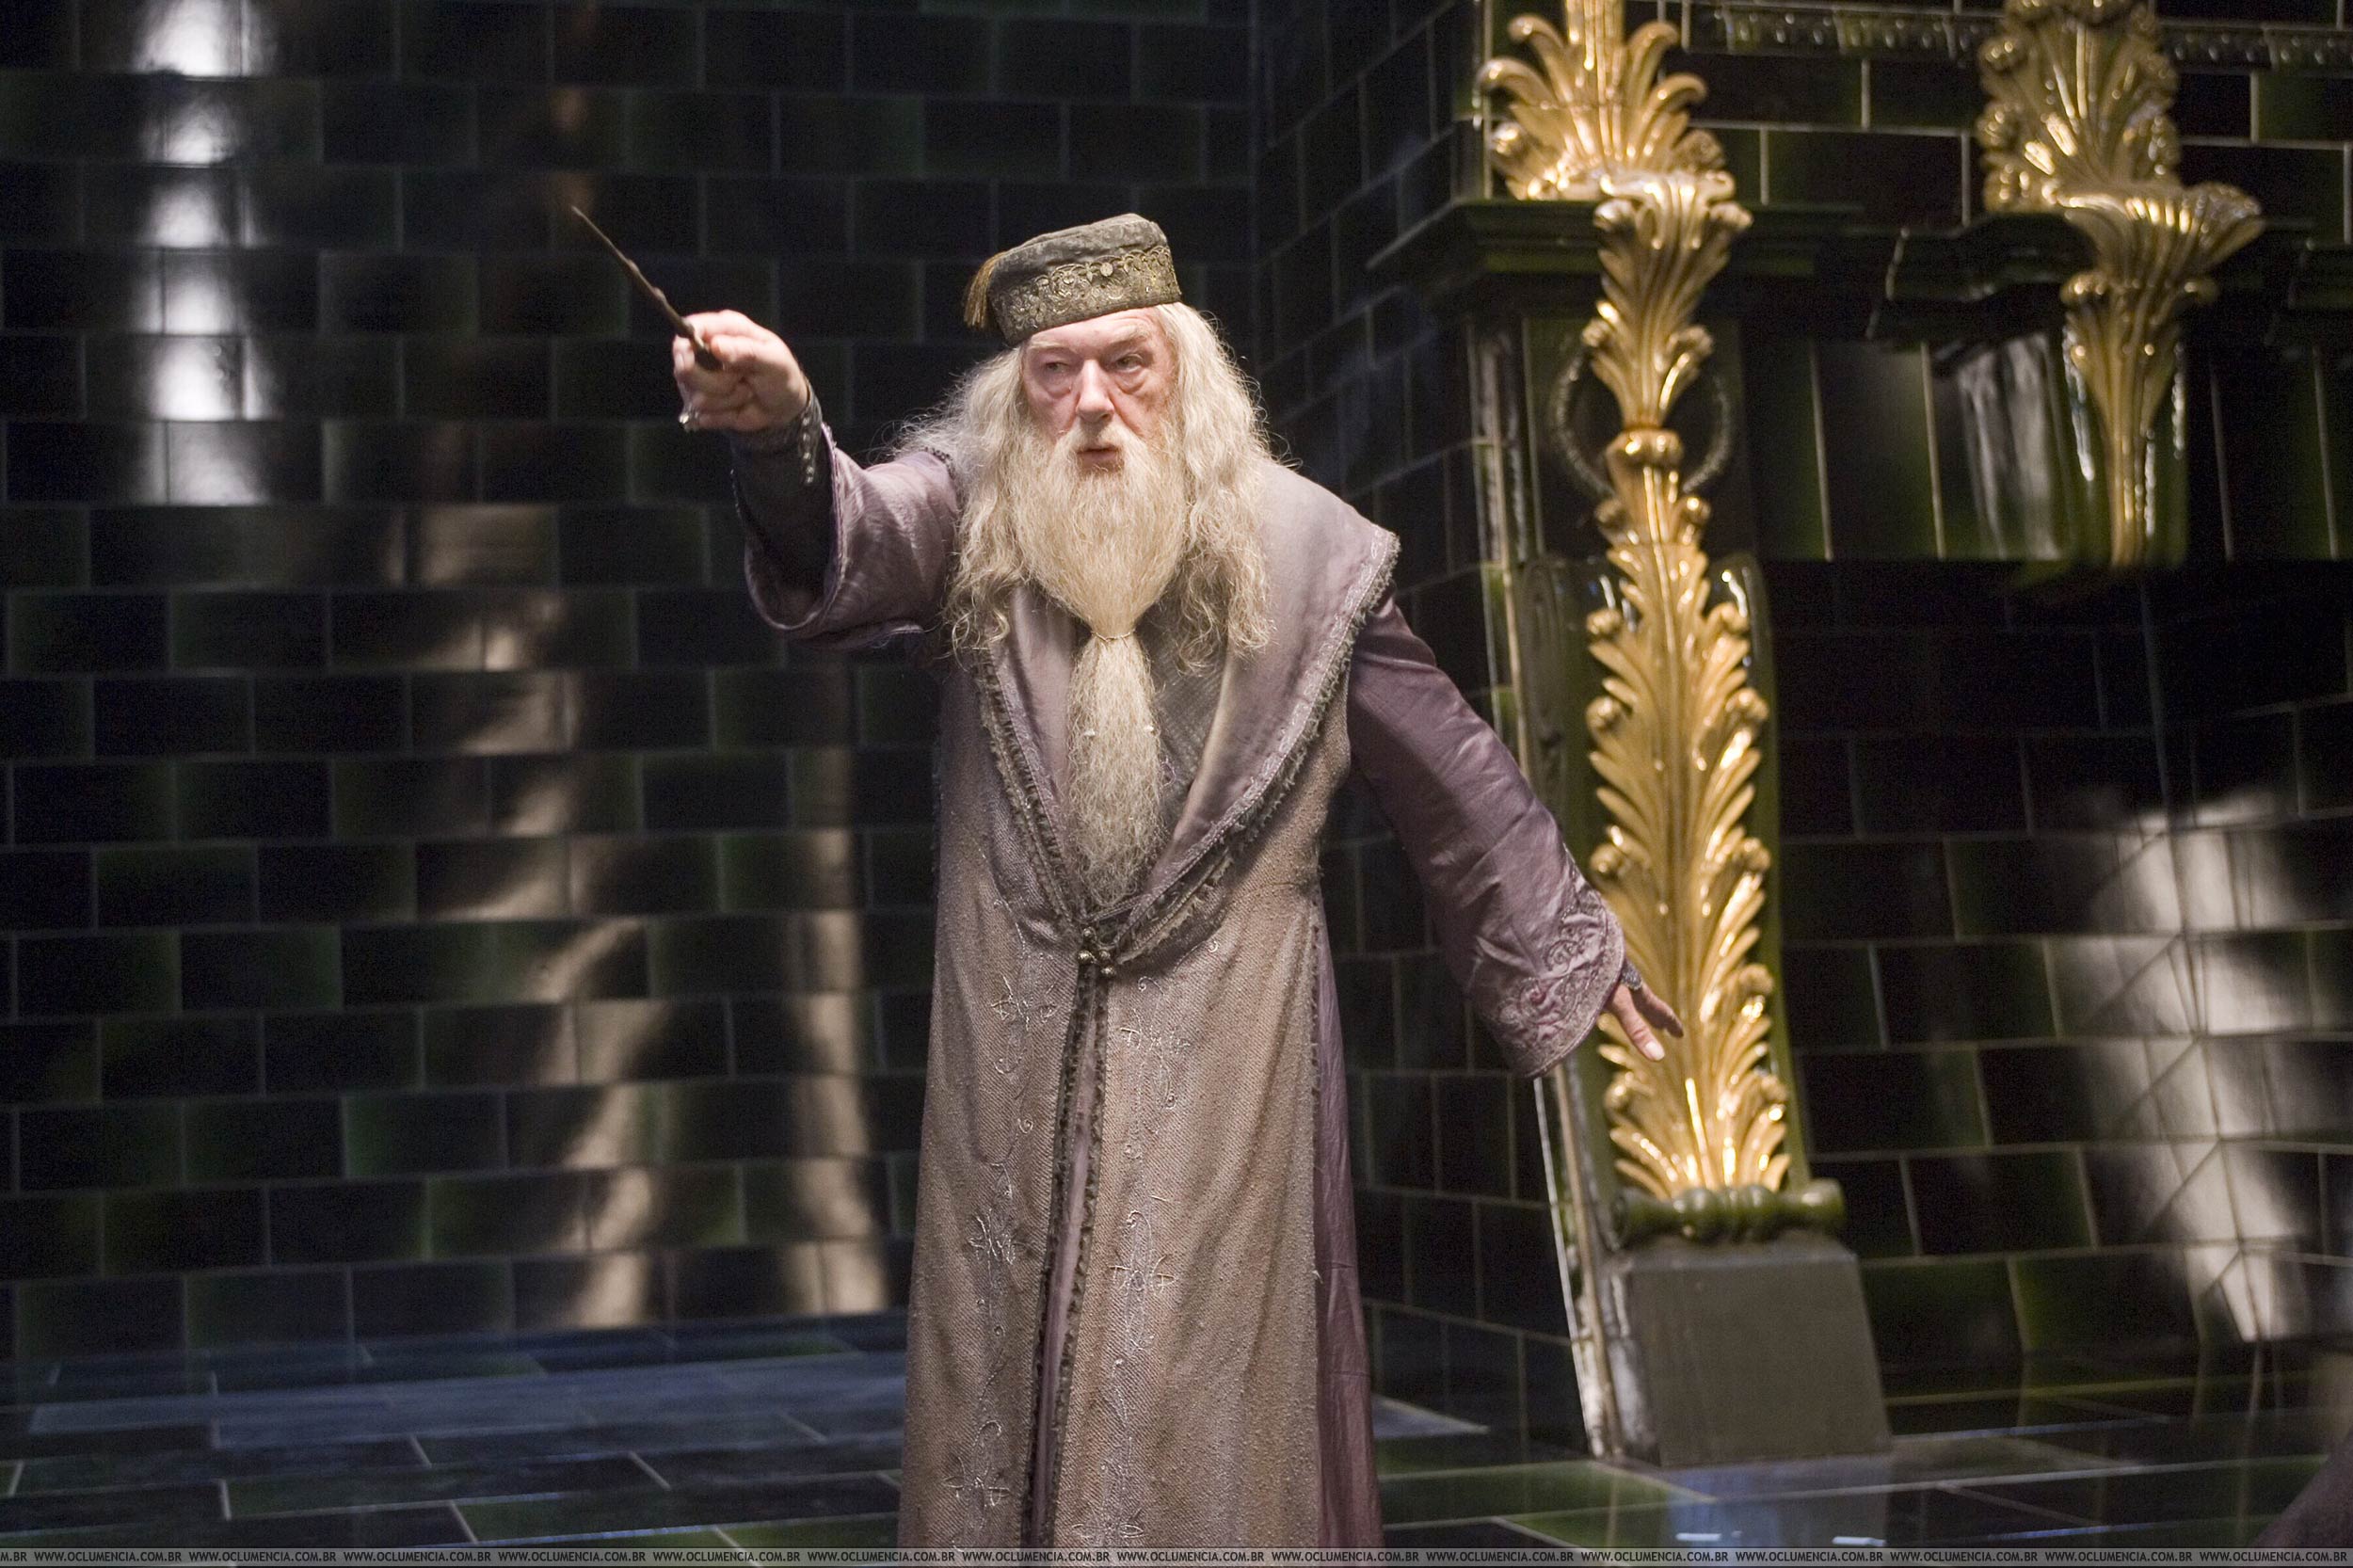 Michael Gambon as Albus Dumbledore in "Harry Potter and the Order of the Phoenix." (Warner Bros.)